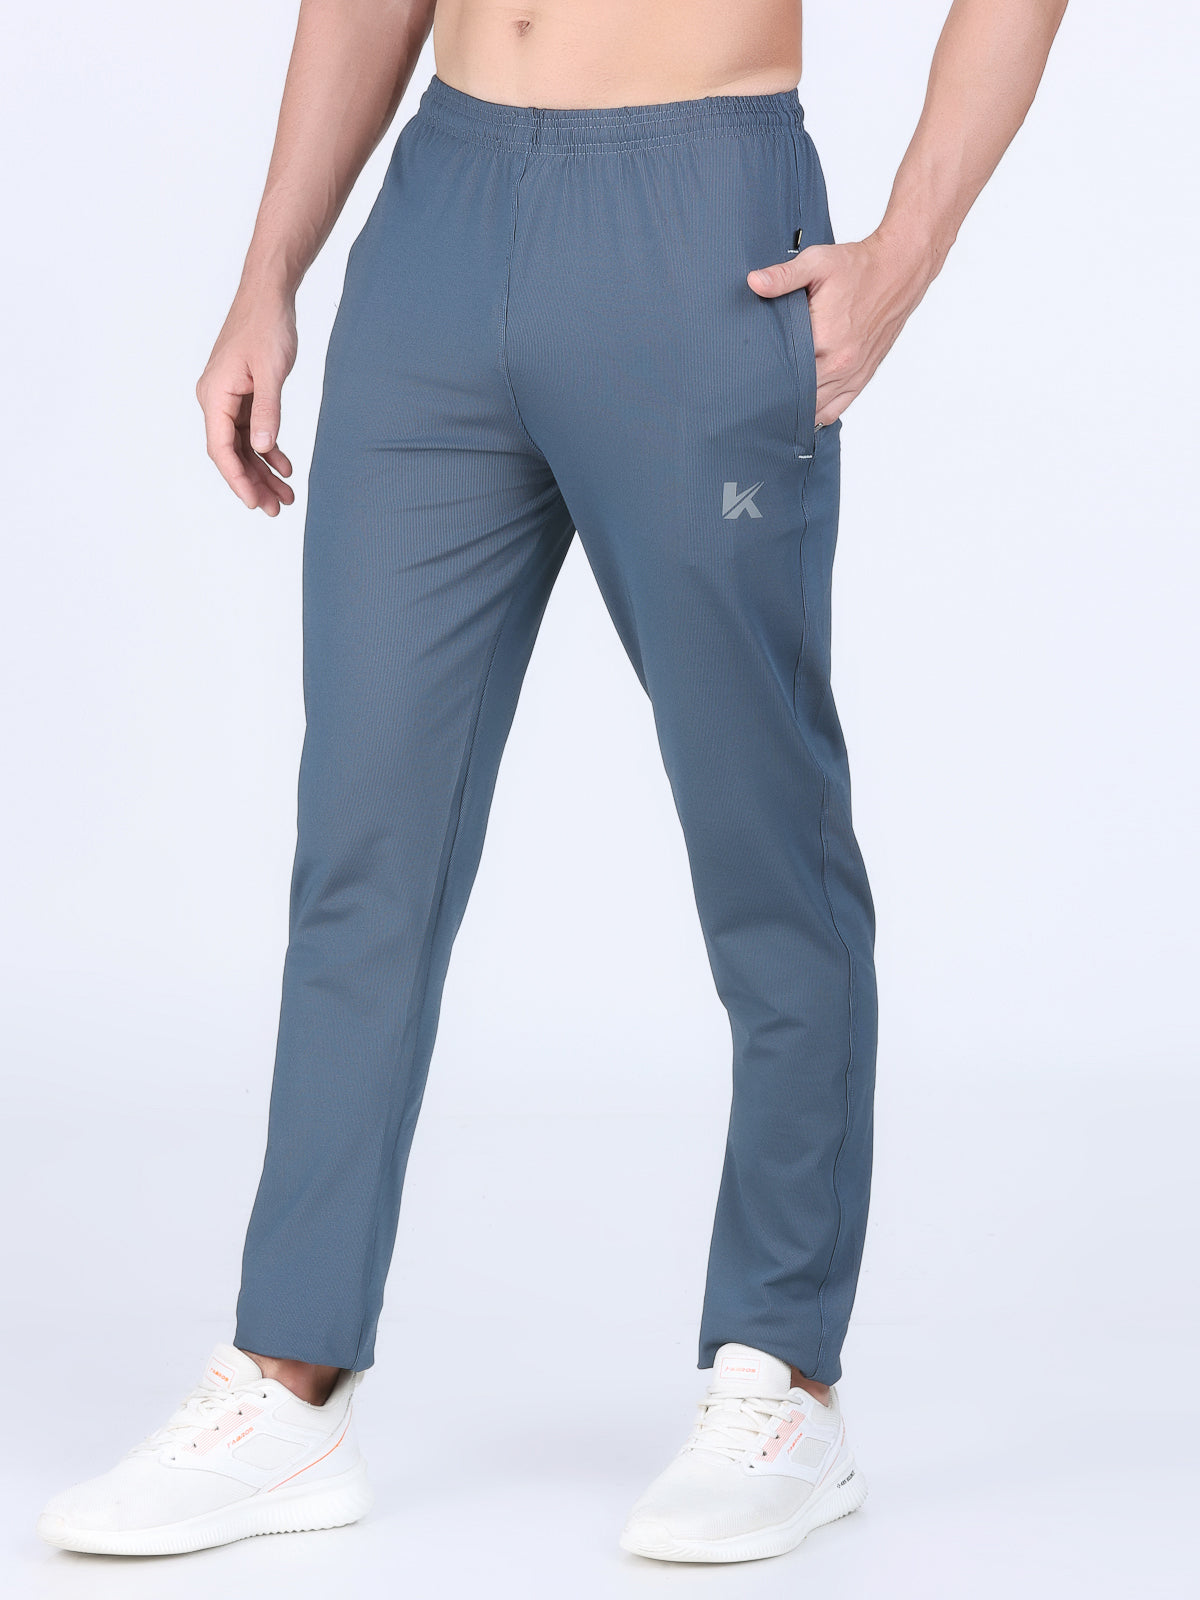 Combo of 2 Men's 4 Way Stretch Lining Dark Grey and CoffeeTrack Pant